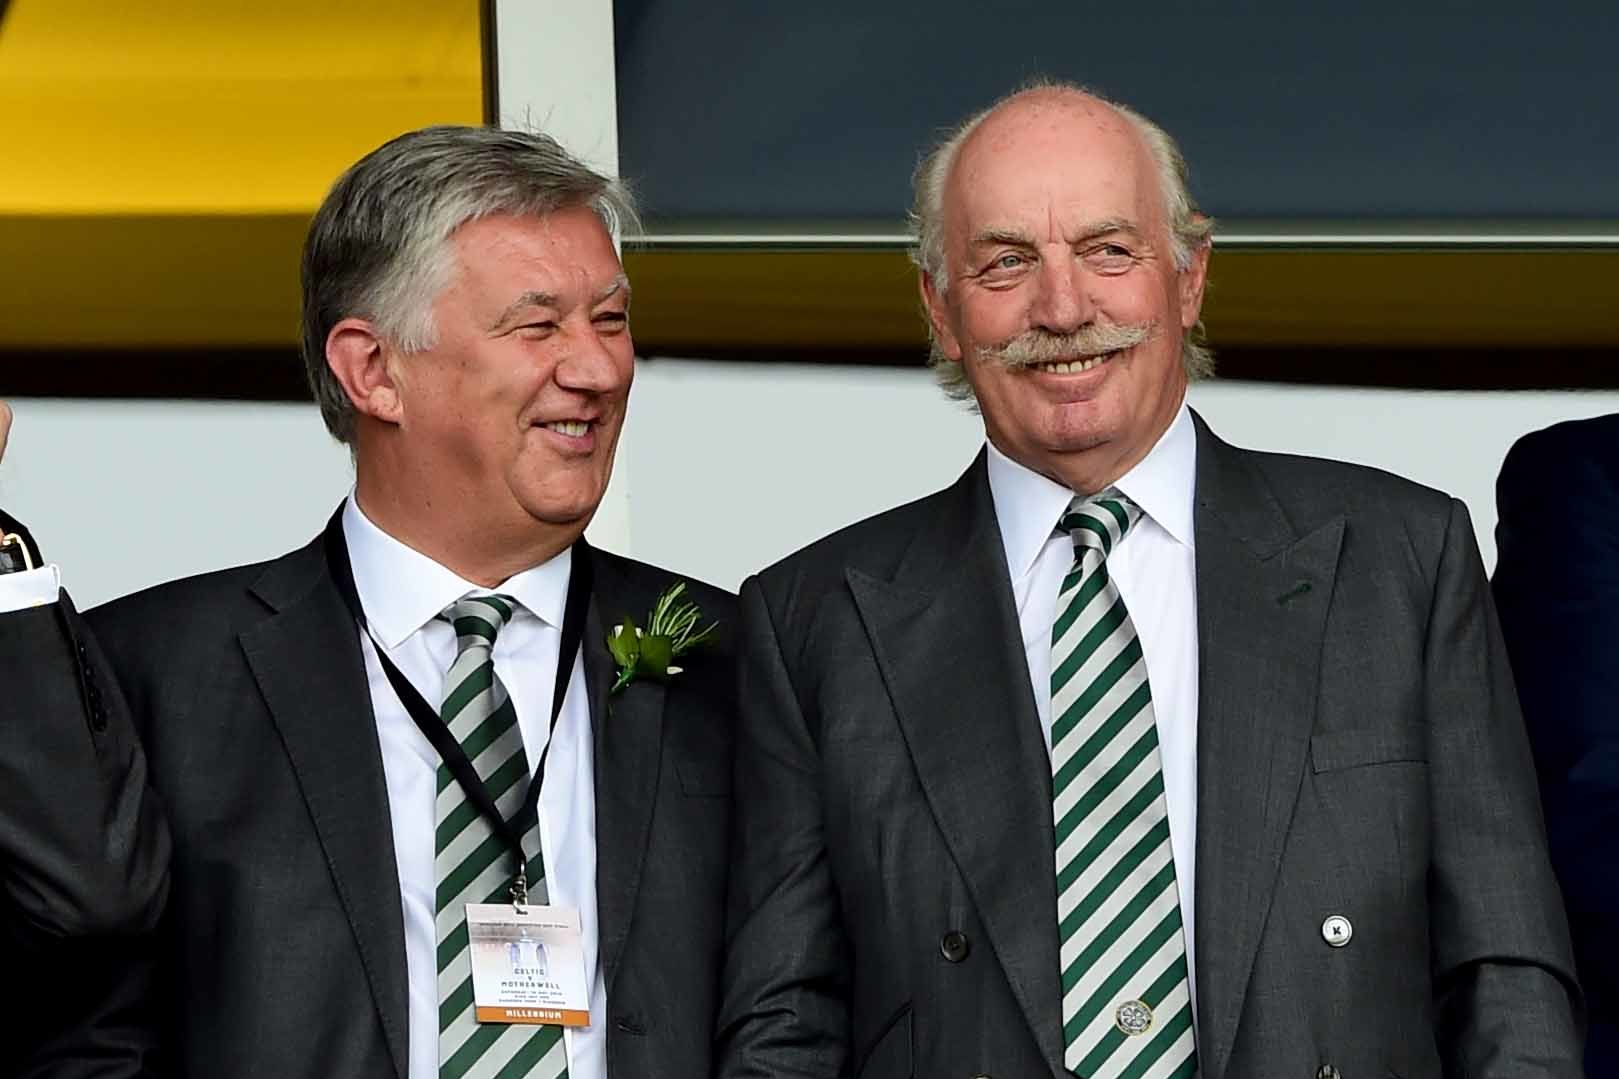 Graeme McGarry: Celtic may be right not to bow to the mob, but Desmond's and Lawwell's legacies now on the line